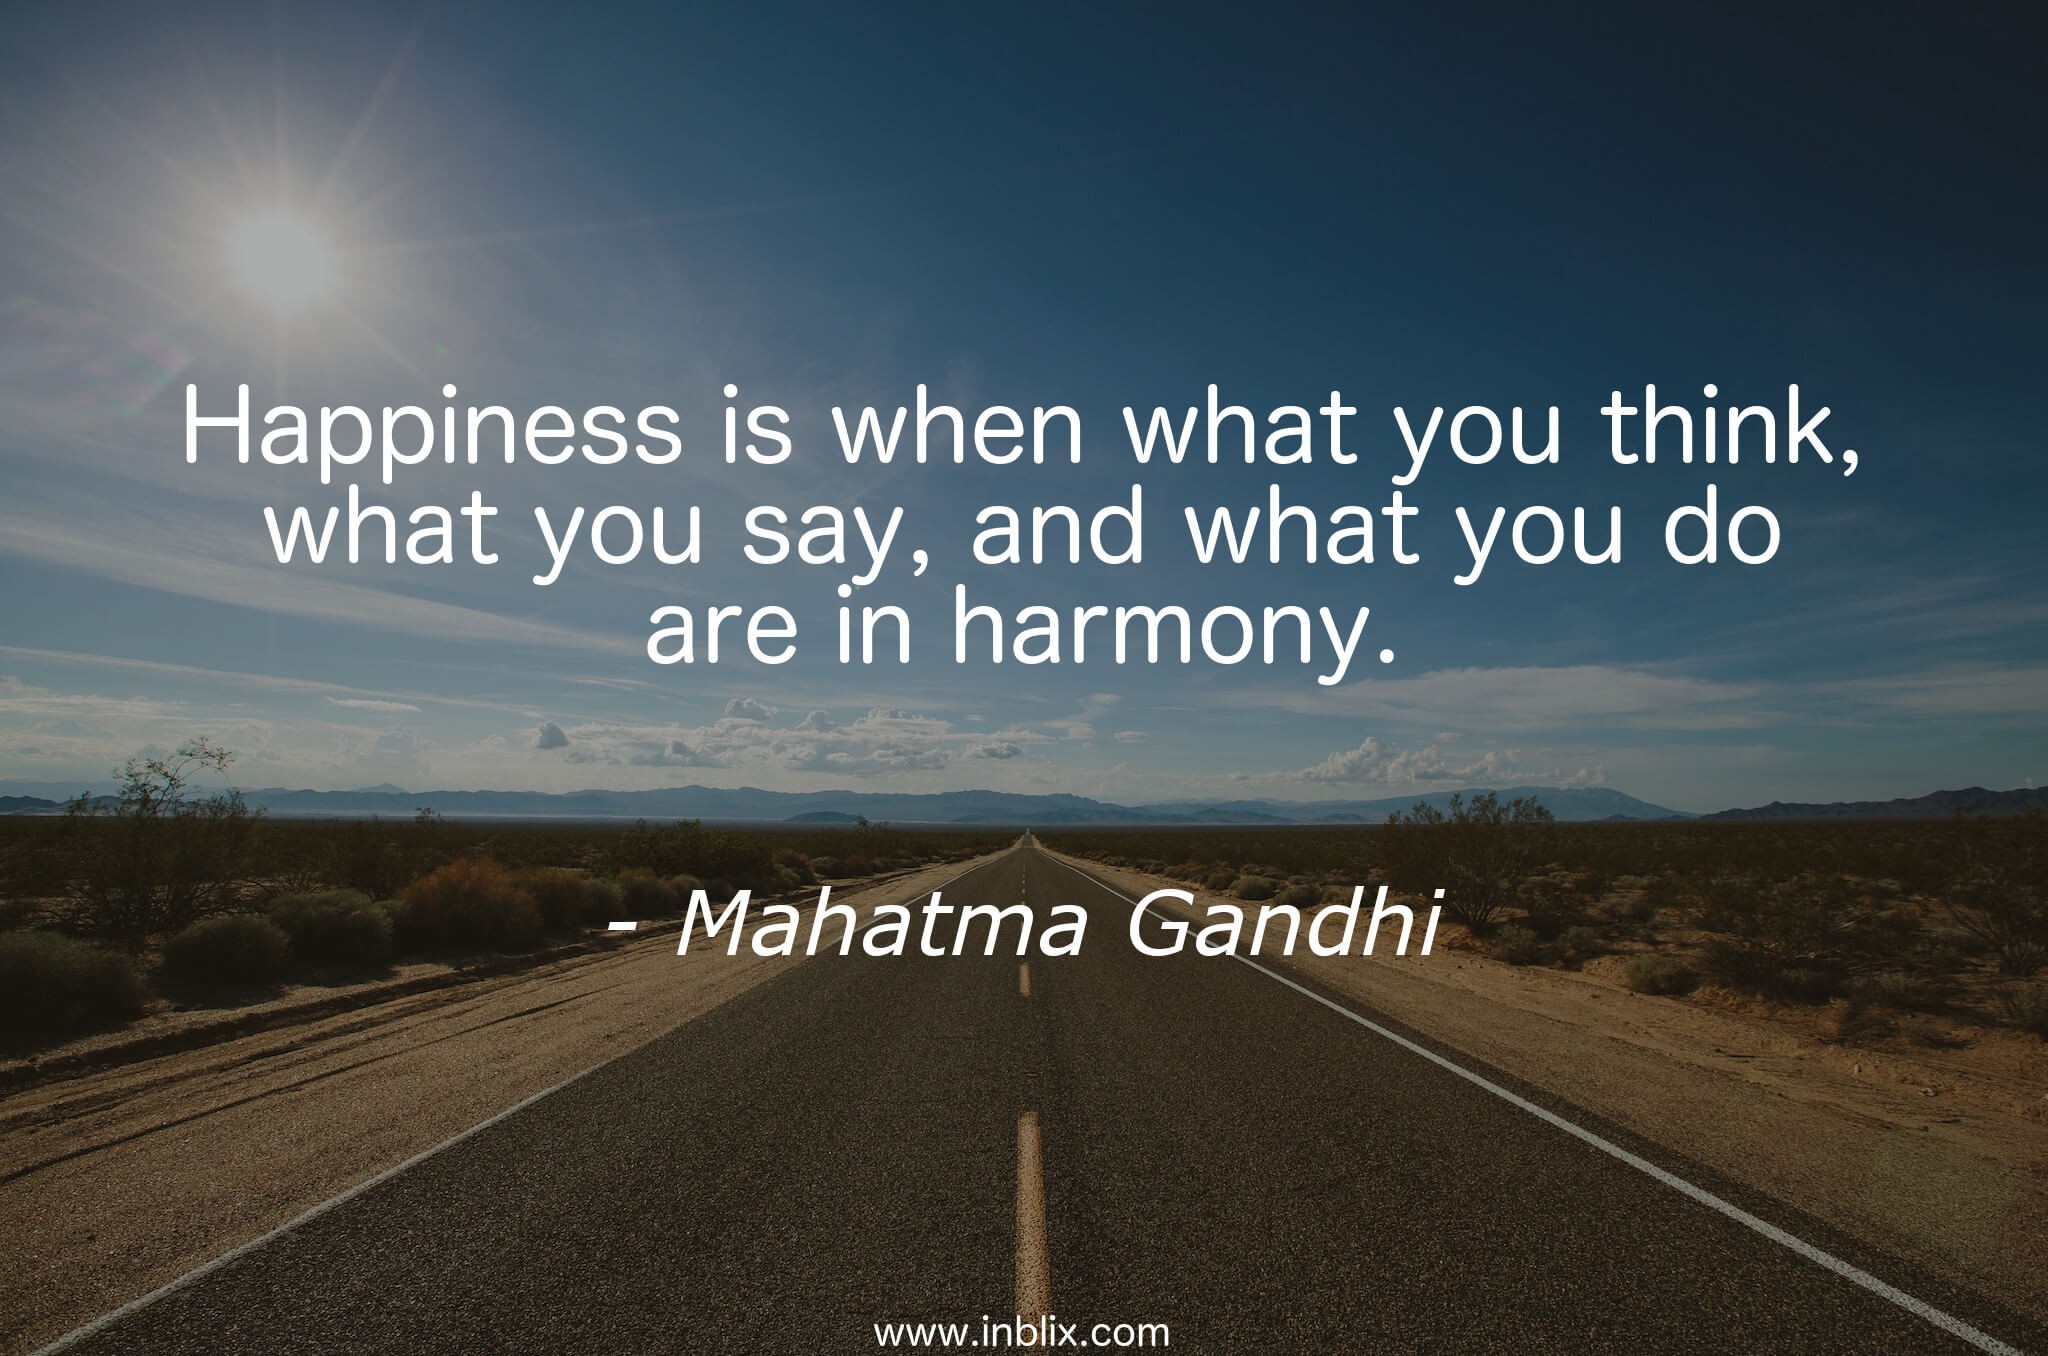 Might you to be happy. When are you Happy. Happiness is when what you think, what you say, and what you do are in Harmony. Happiness is when you are understood. What is Happiness for you.